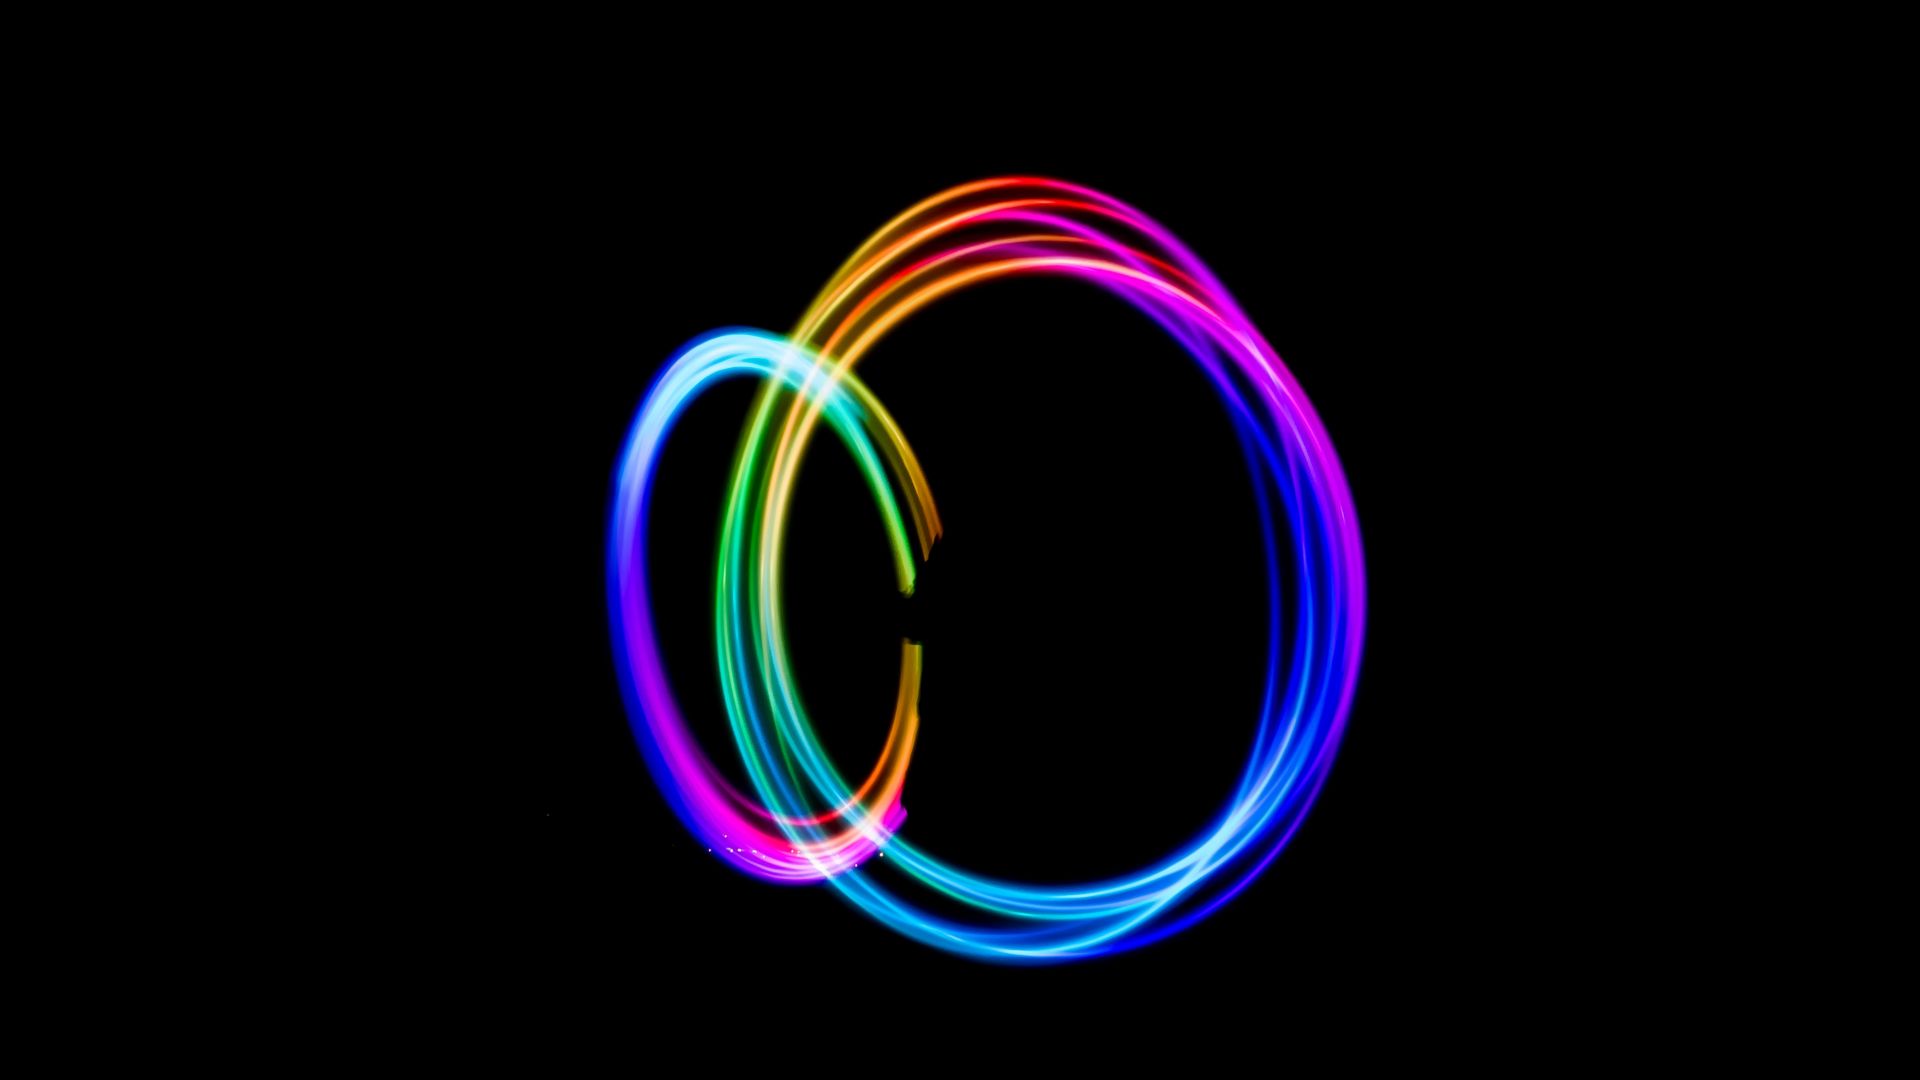 Desktop Wallpaper Colorful, Circles, Minimal, Dark, Abstract, HD Image, Picture, Background, 134025